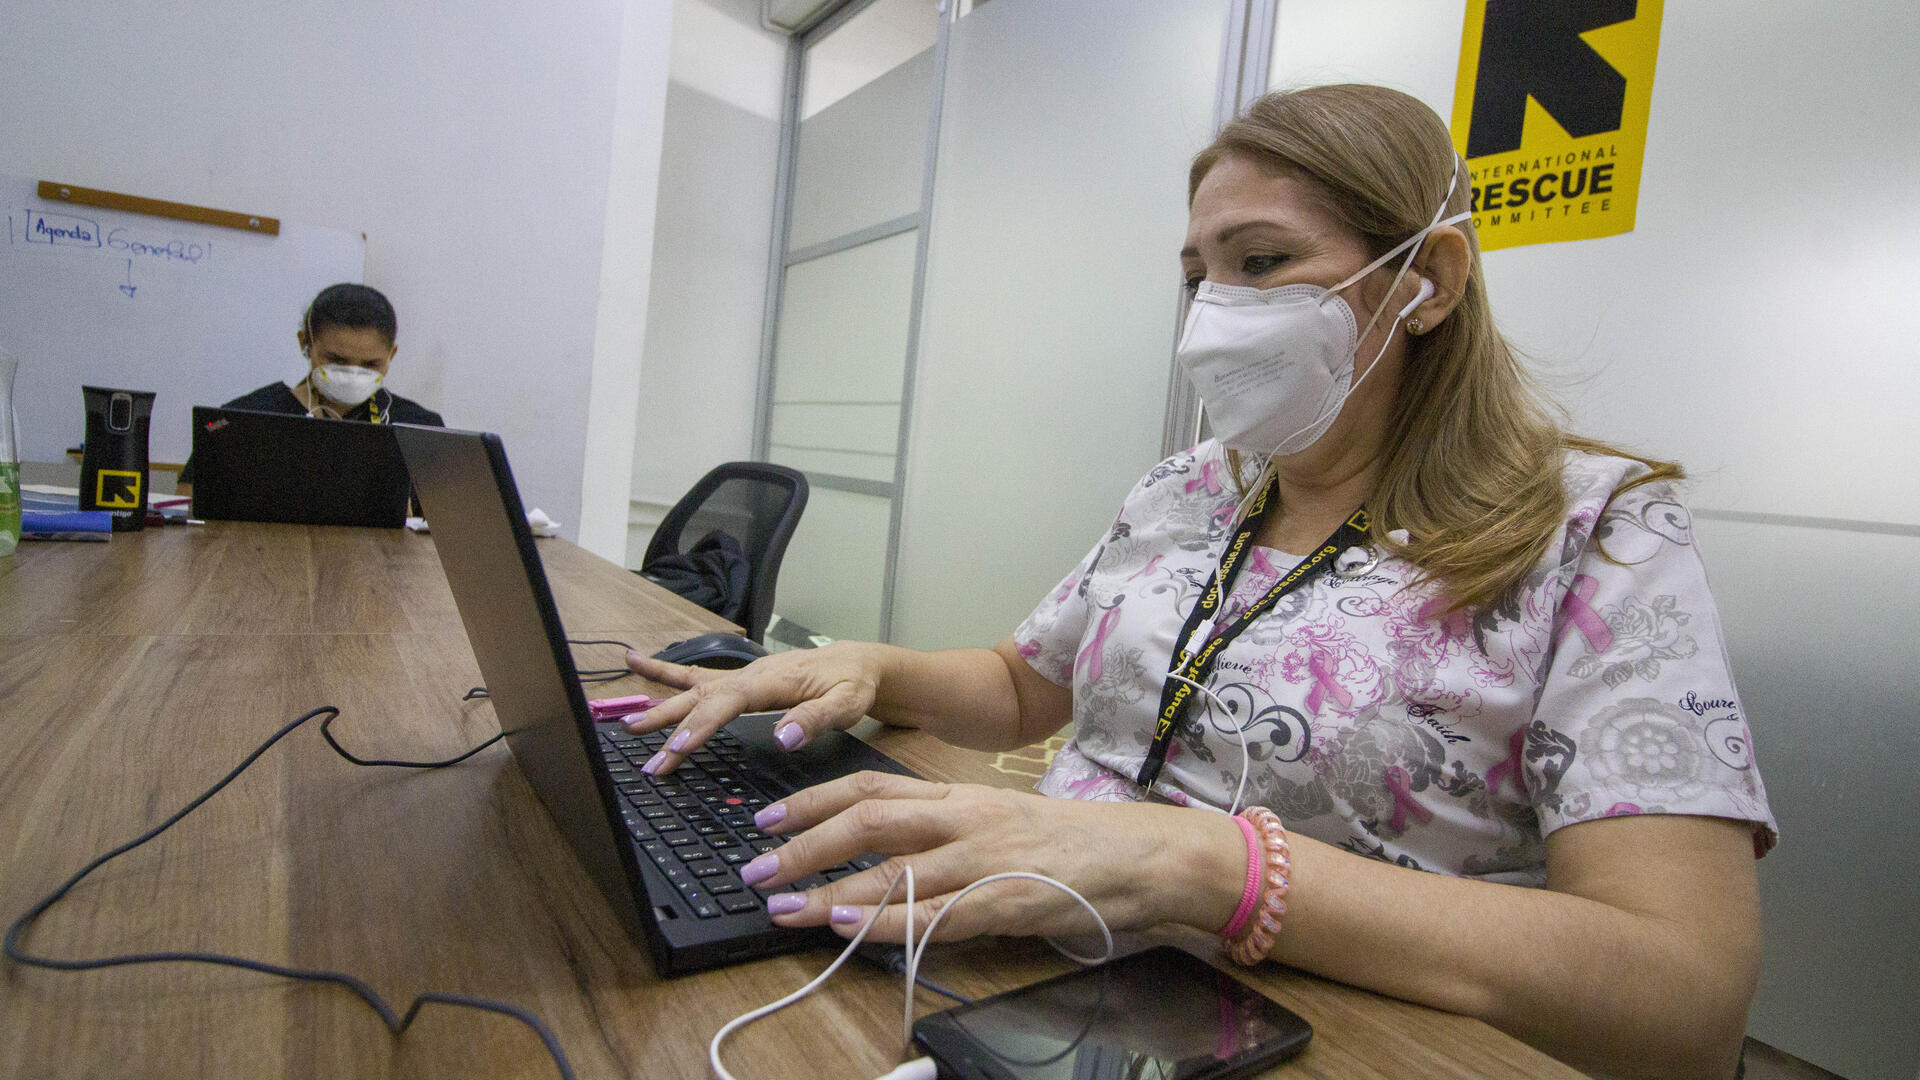 An IRC healthworker wearing a mask to protect herself from COVID-19 types at a laptop